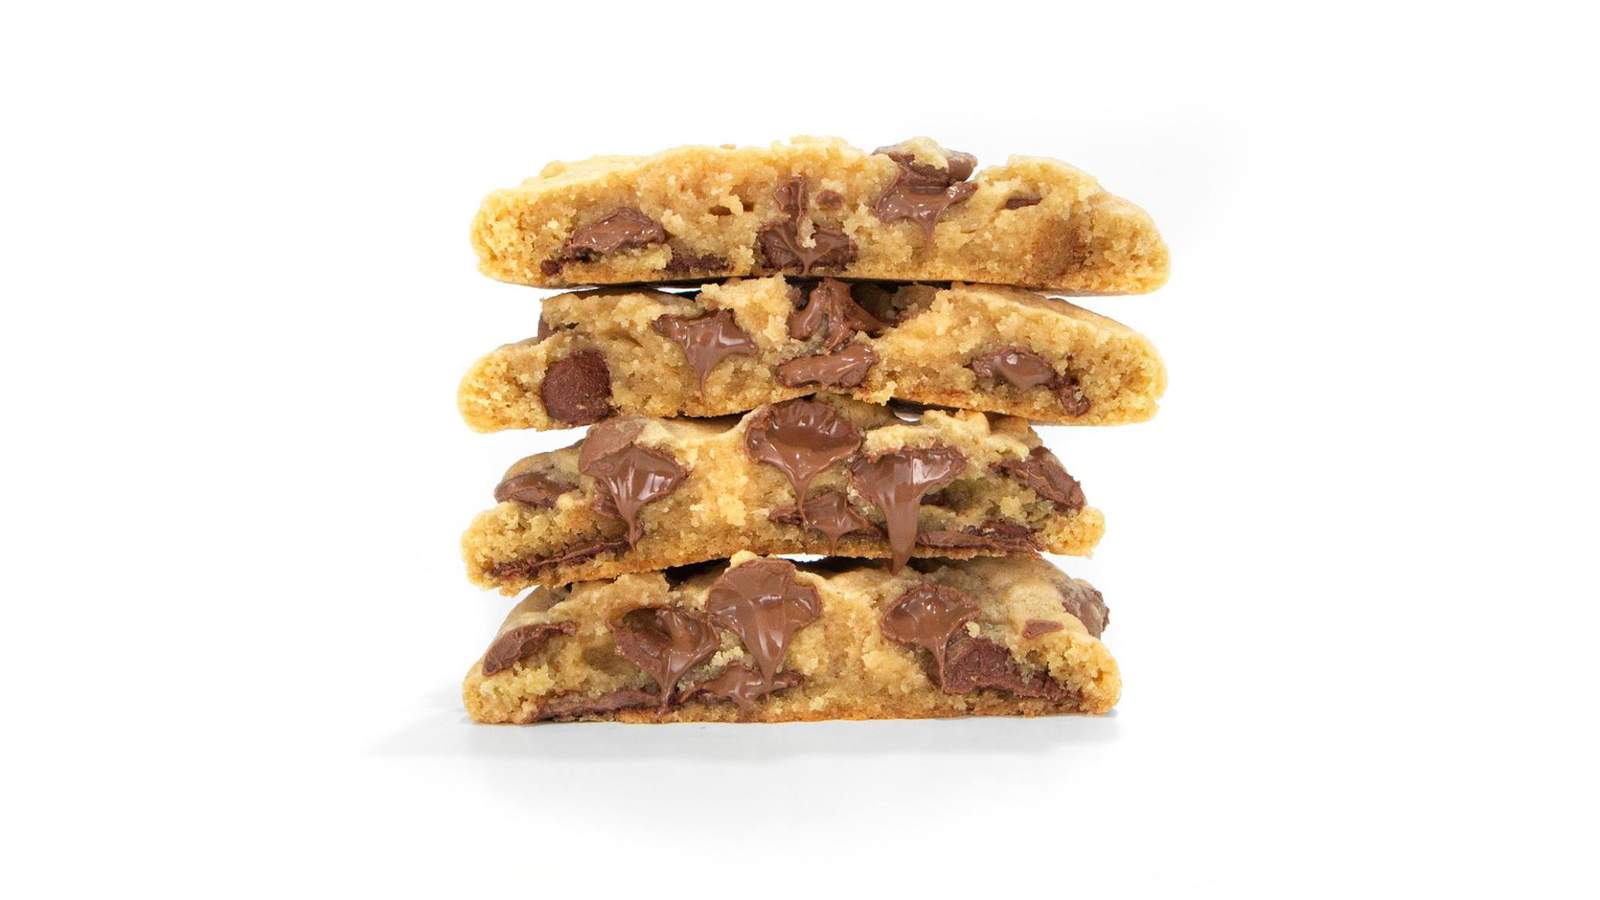 Free cookies alert: Celebrate National Cookie Day in Ann Arbor today